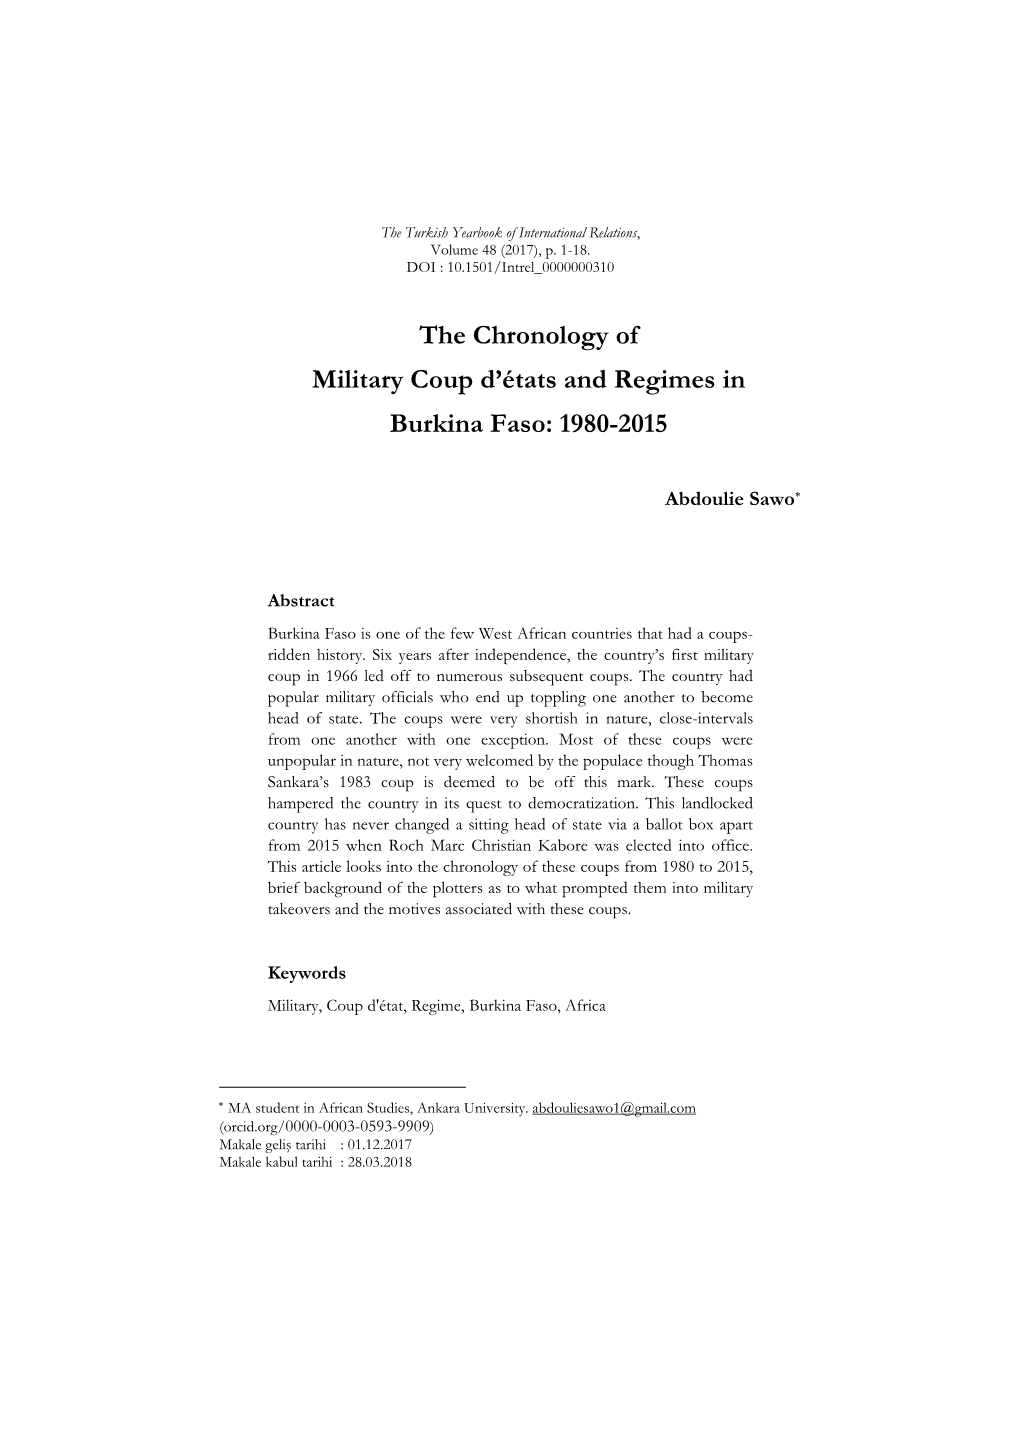 The Chronology of Military Coup D'états and Regimes in Burkina Faso